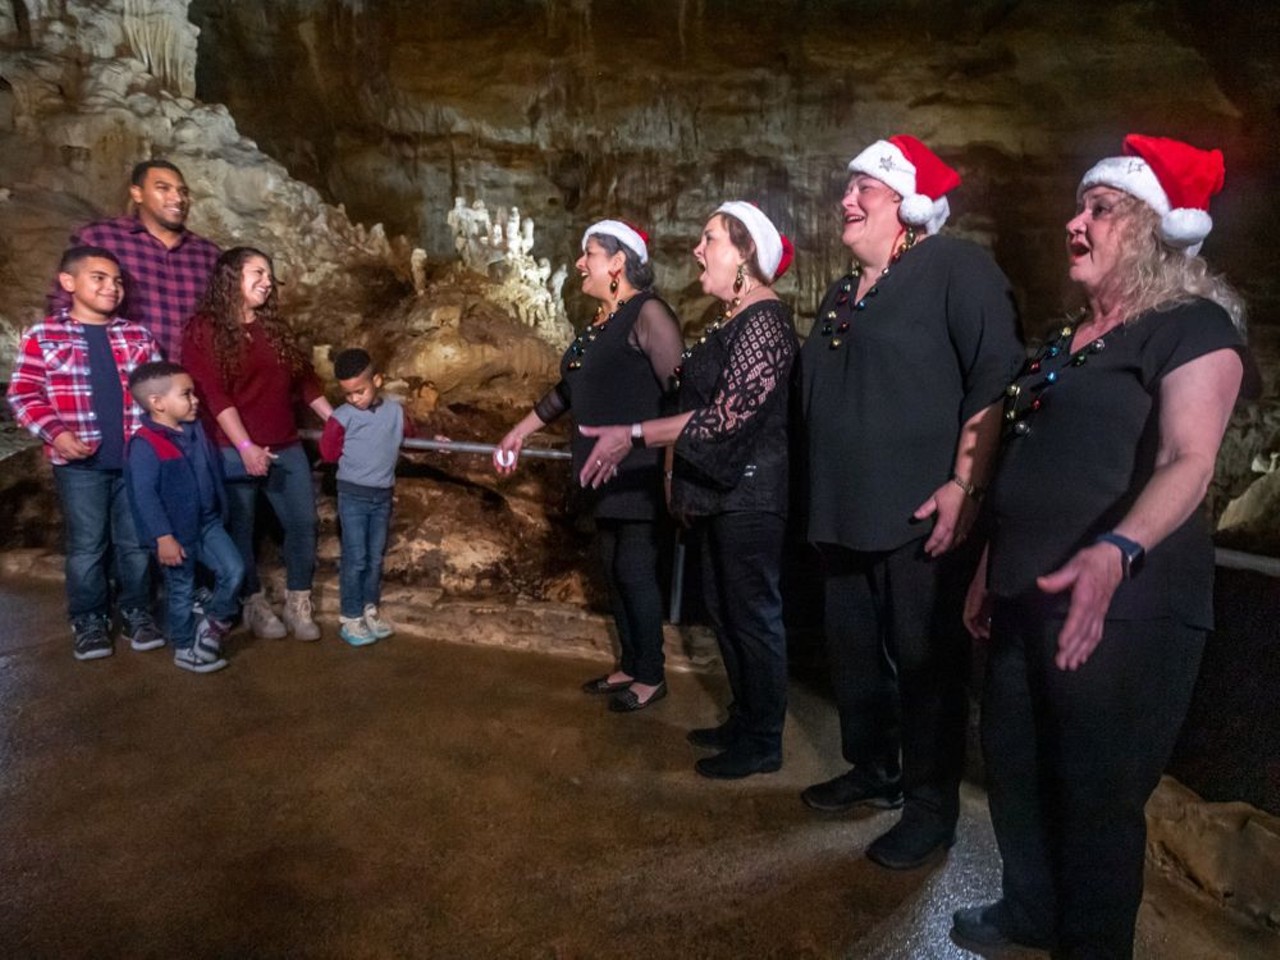 Listen to underground caroling
Natural Bridge Caverns’ Christmas at the Caverns is a popular way to celebrate the holidays. Guests will find holiday lights scattered about the grounds as well as fun activities like caroling in the caverns, story time with Mrs. Claus and a maze to find Santa’s reindeer.